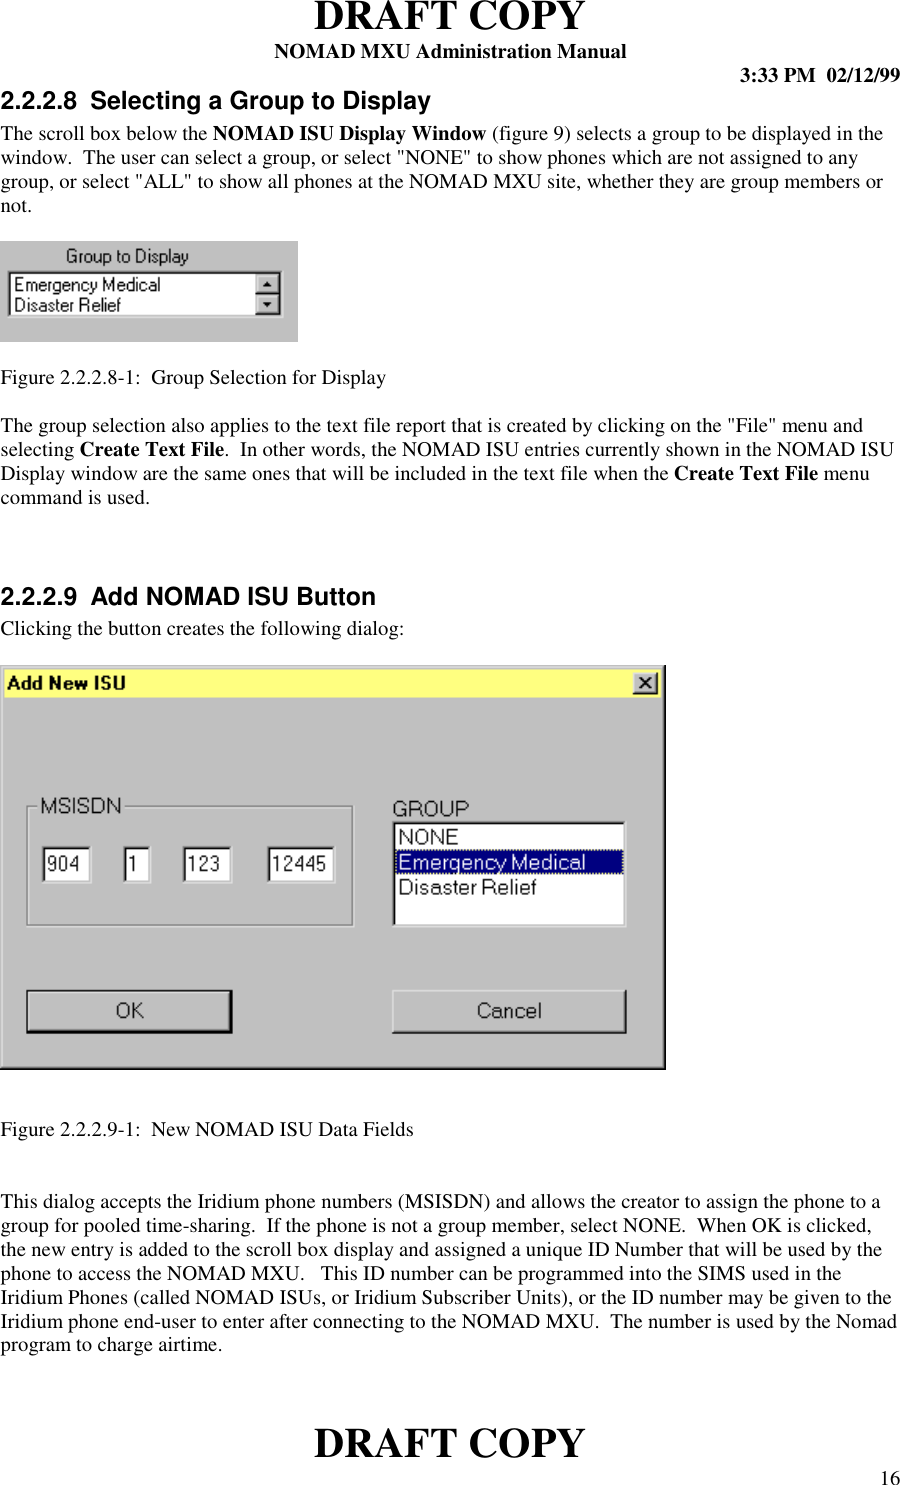 DRAFT COPYNOMAD MXU Administration Manual 3:33 PM  02/12/99DRAFT COPY 162.2.2.8  Selecting a Group to DisplayThe scroll box below the NOMAD ISU Display Window (figure 9) selects a group to be displayed in thewindow.  The user can select a group, or select &quot;NONE&quot; to show phones which are not assigned to anygroup, or select &quot;ALL&quot; to show all phones at the NOMAD MXU site, whether they are group members ornot.Figure 2.2.2.8-1:  Group Selection for DisplayThe group selection also applies to the text file report that is created by clicking on the &quot;File&quot; menu andselecting Create Text File.  In other words, the NOMAD ISU entries currently shown in the NOMAD ISUDisplay window are the same ones that will be included in the text file when the Create Text File menucommand is used.2.2.2.9  Add NOMAD ISU ButtonClicking the button creates the following dialog:Figure 2.2.2.9-1:  New NOMAD ISU Data FieldsThis dialog accepts the Iridium phone numbers (MSISDN) and allows the creator to assign the phone to agroup for pooled time-sharing.  If the phone is not a group member, select NONE.  When OK is clicked,the new entry is added to the scroll box display and assigned a unique ID Number that will be used by thephone to access the NOMAD MXU.   This ID number can be programmed into the SIMS used in theIridium Phones (called NOMAD ISUs, or Iridium Subscriber Units), or the ID number may be given to theIridium phone end-user to enter after connecting to the NOMAD MXU.  The number is used by the Nomadprogram to charge airtime.